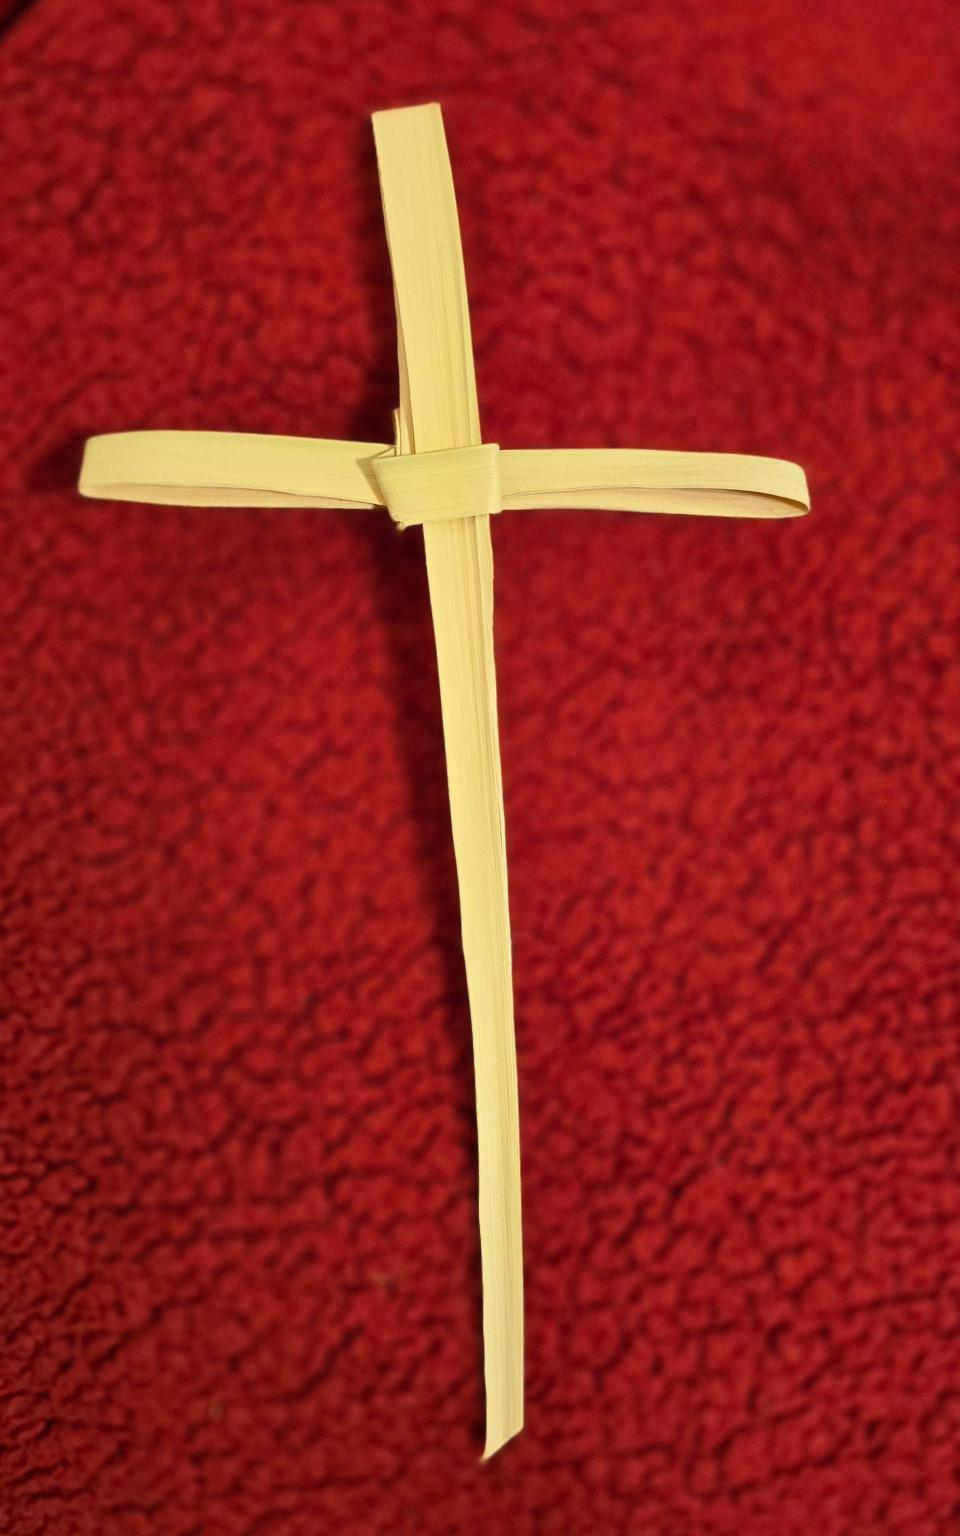 A Christian cross made of palm fronds is one of dozens made by members of Camp Ground United Methodist Church for its recent Palm Sunday observance. The church on Campground Road is also holding services for Maundy Thursday, Good Friday, Easter sunrise service and Sunday morning service.